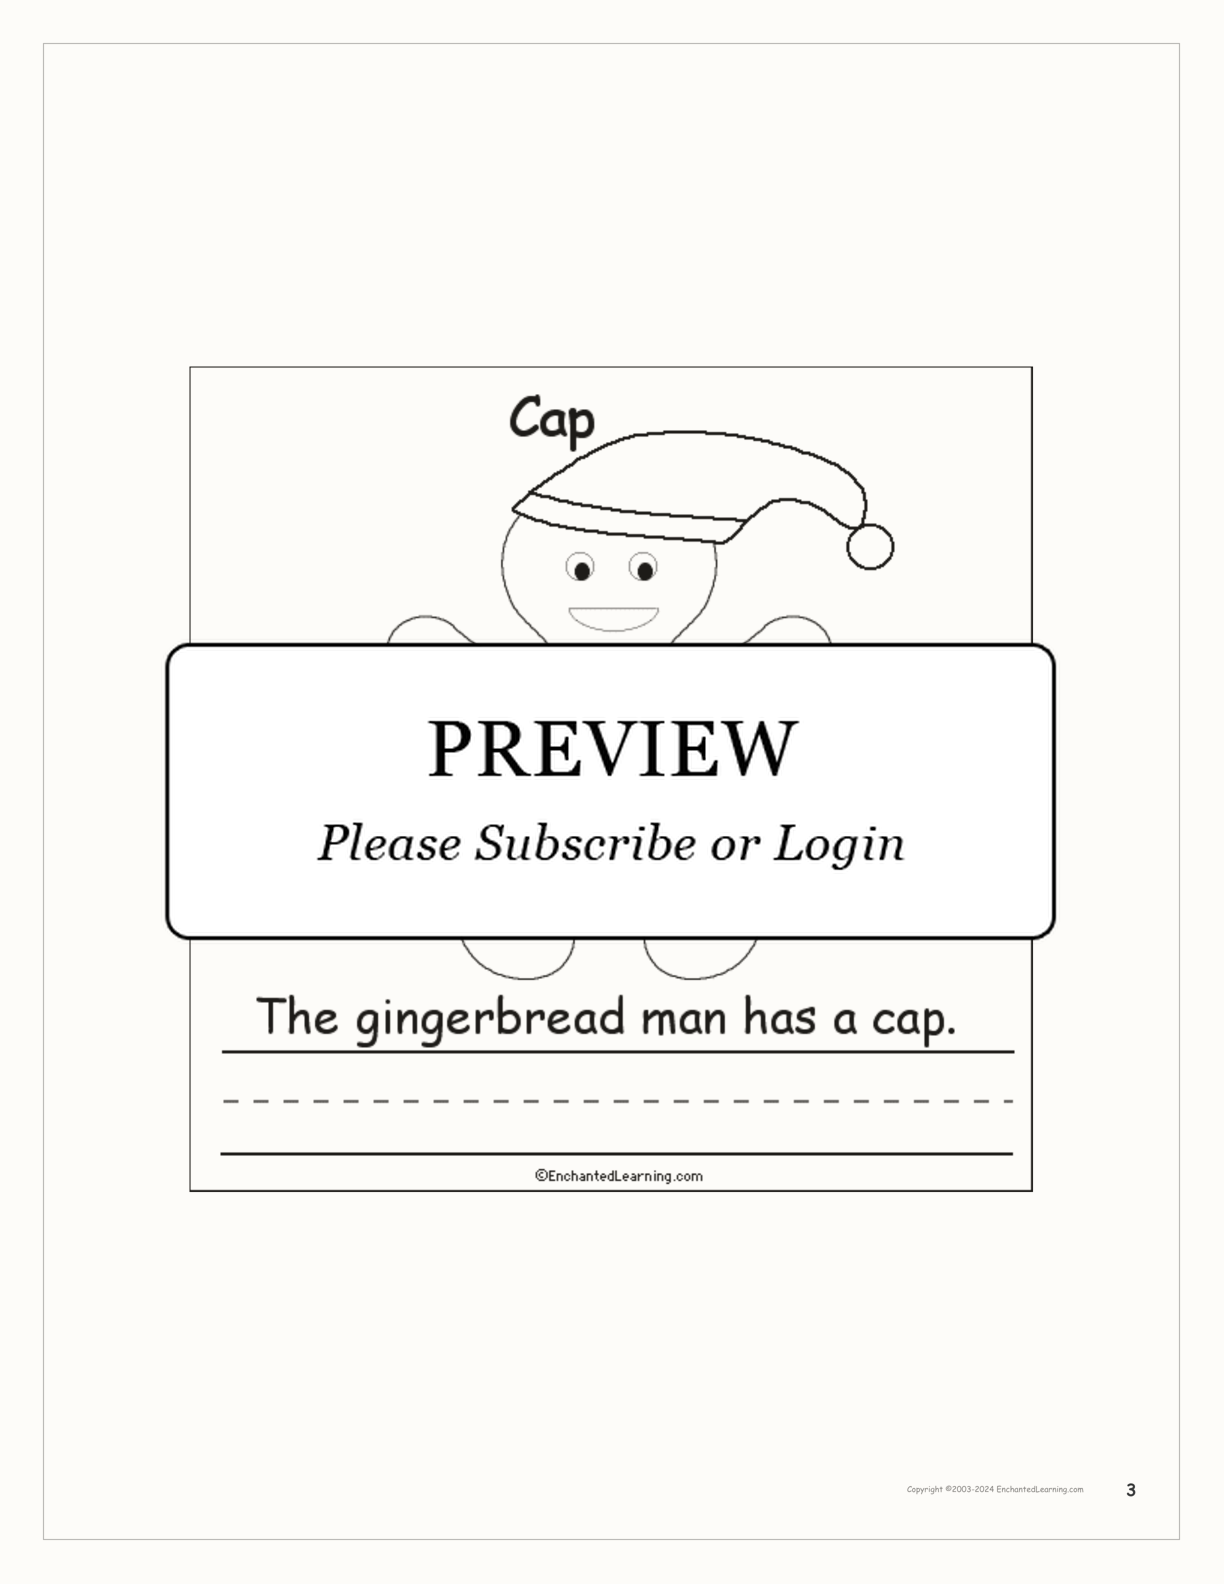 The Gingerbread Man's Clothes: Early Reader Book interactive worksheet page 3